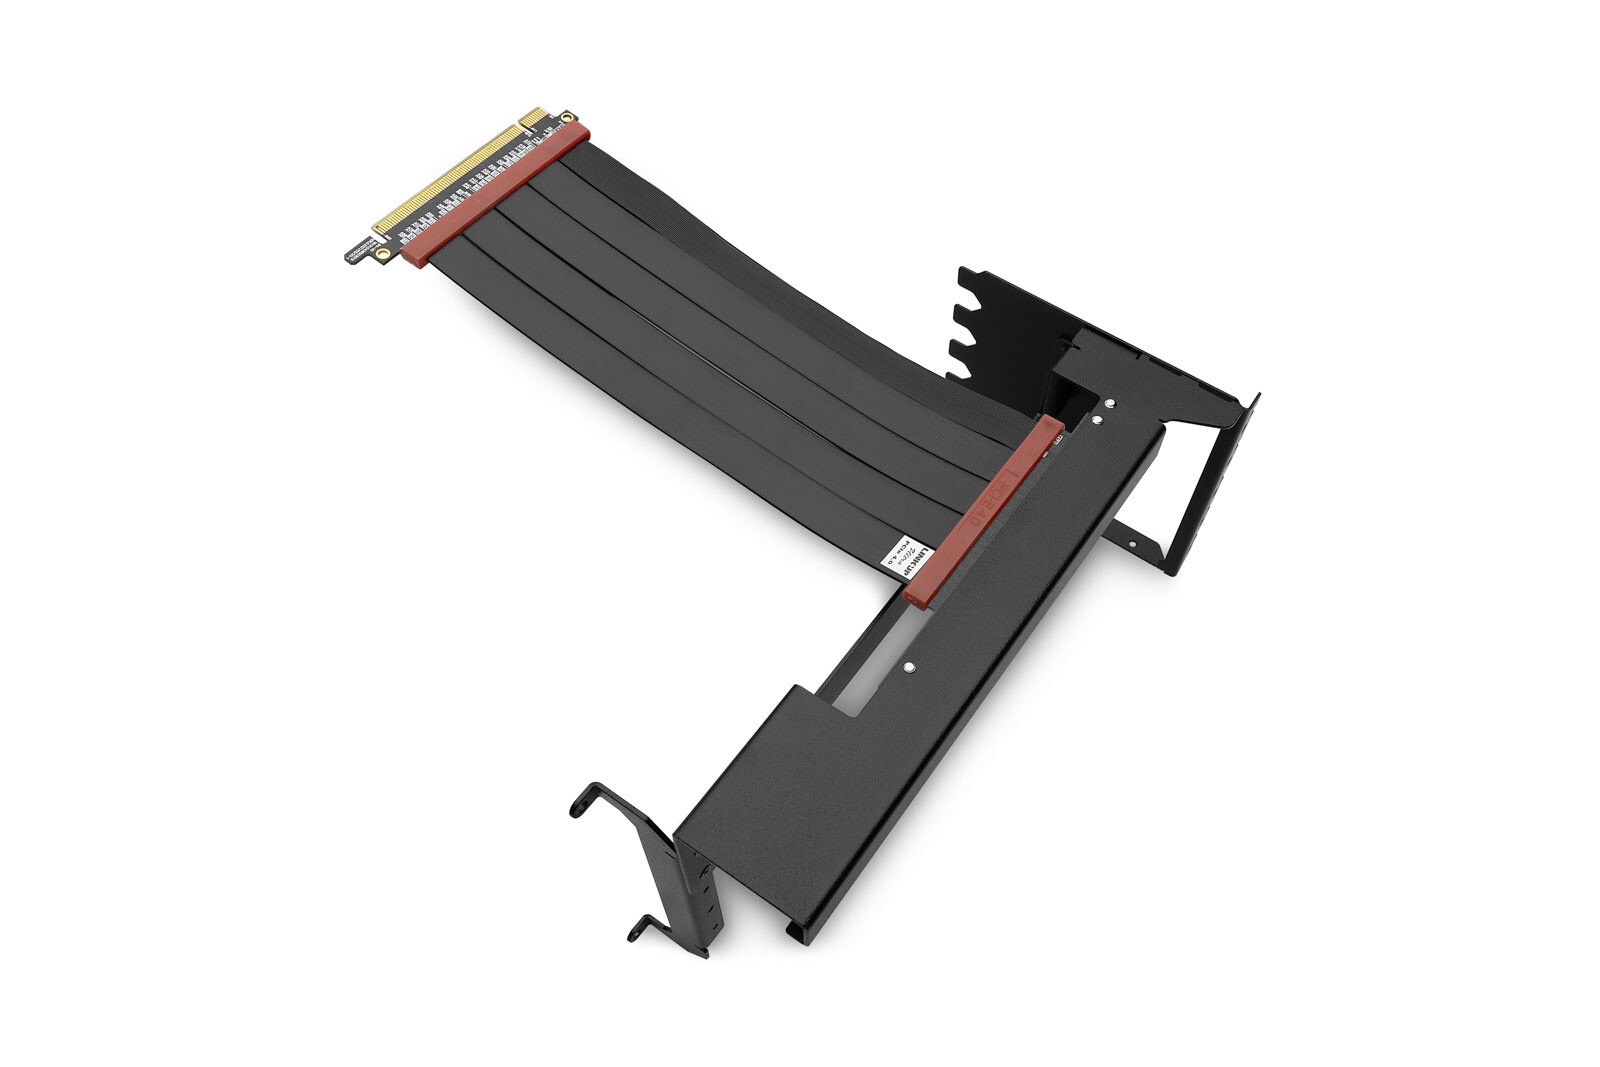 EK Launches Evolved ABP-Compatible Vertical GPU Holder With a PCIe 4.0 Riser Cable